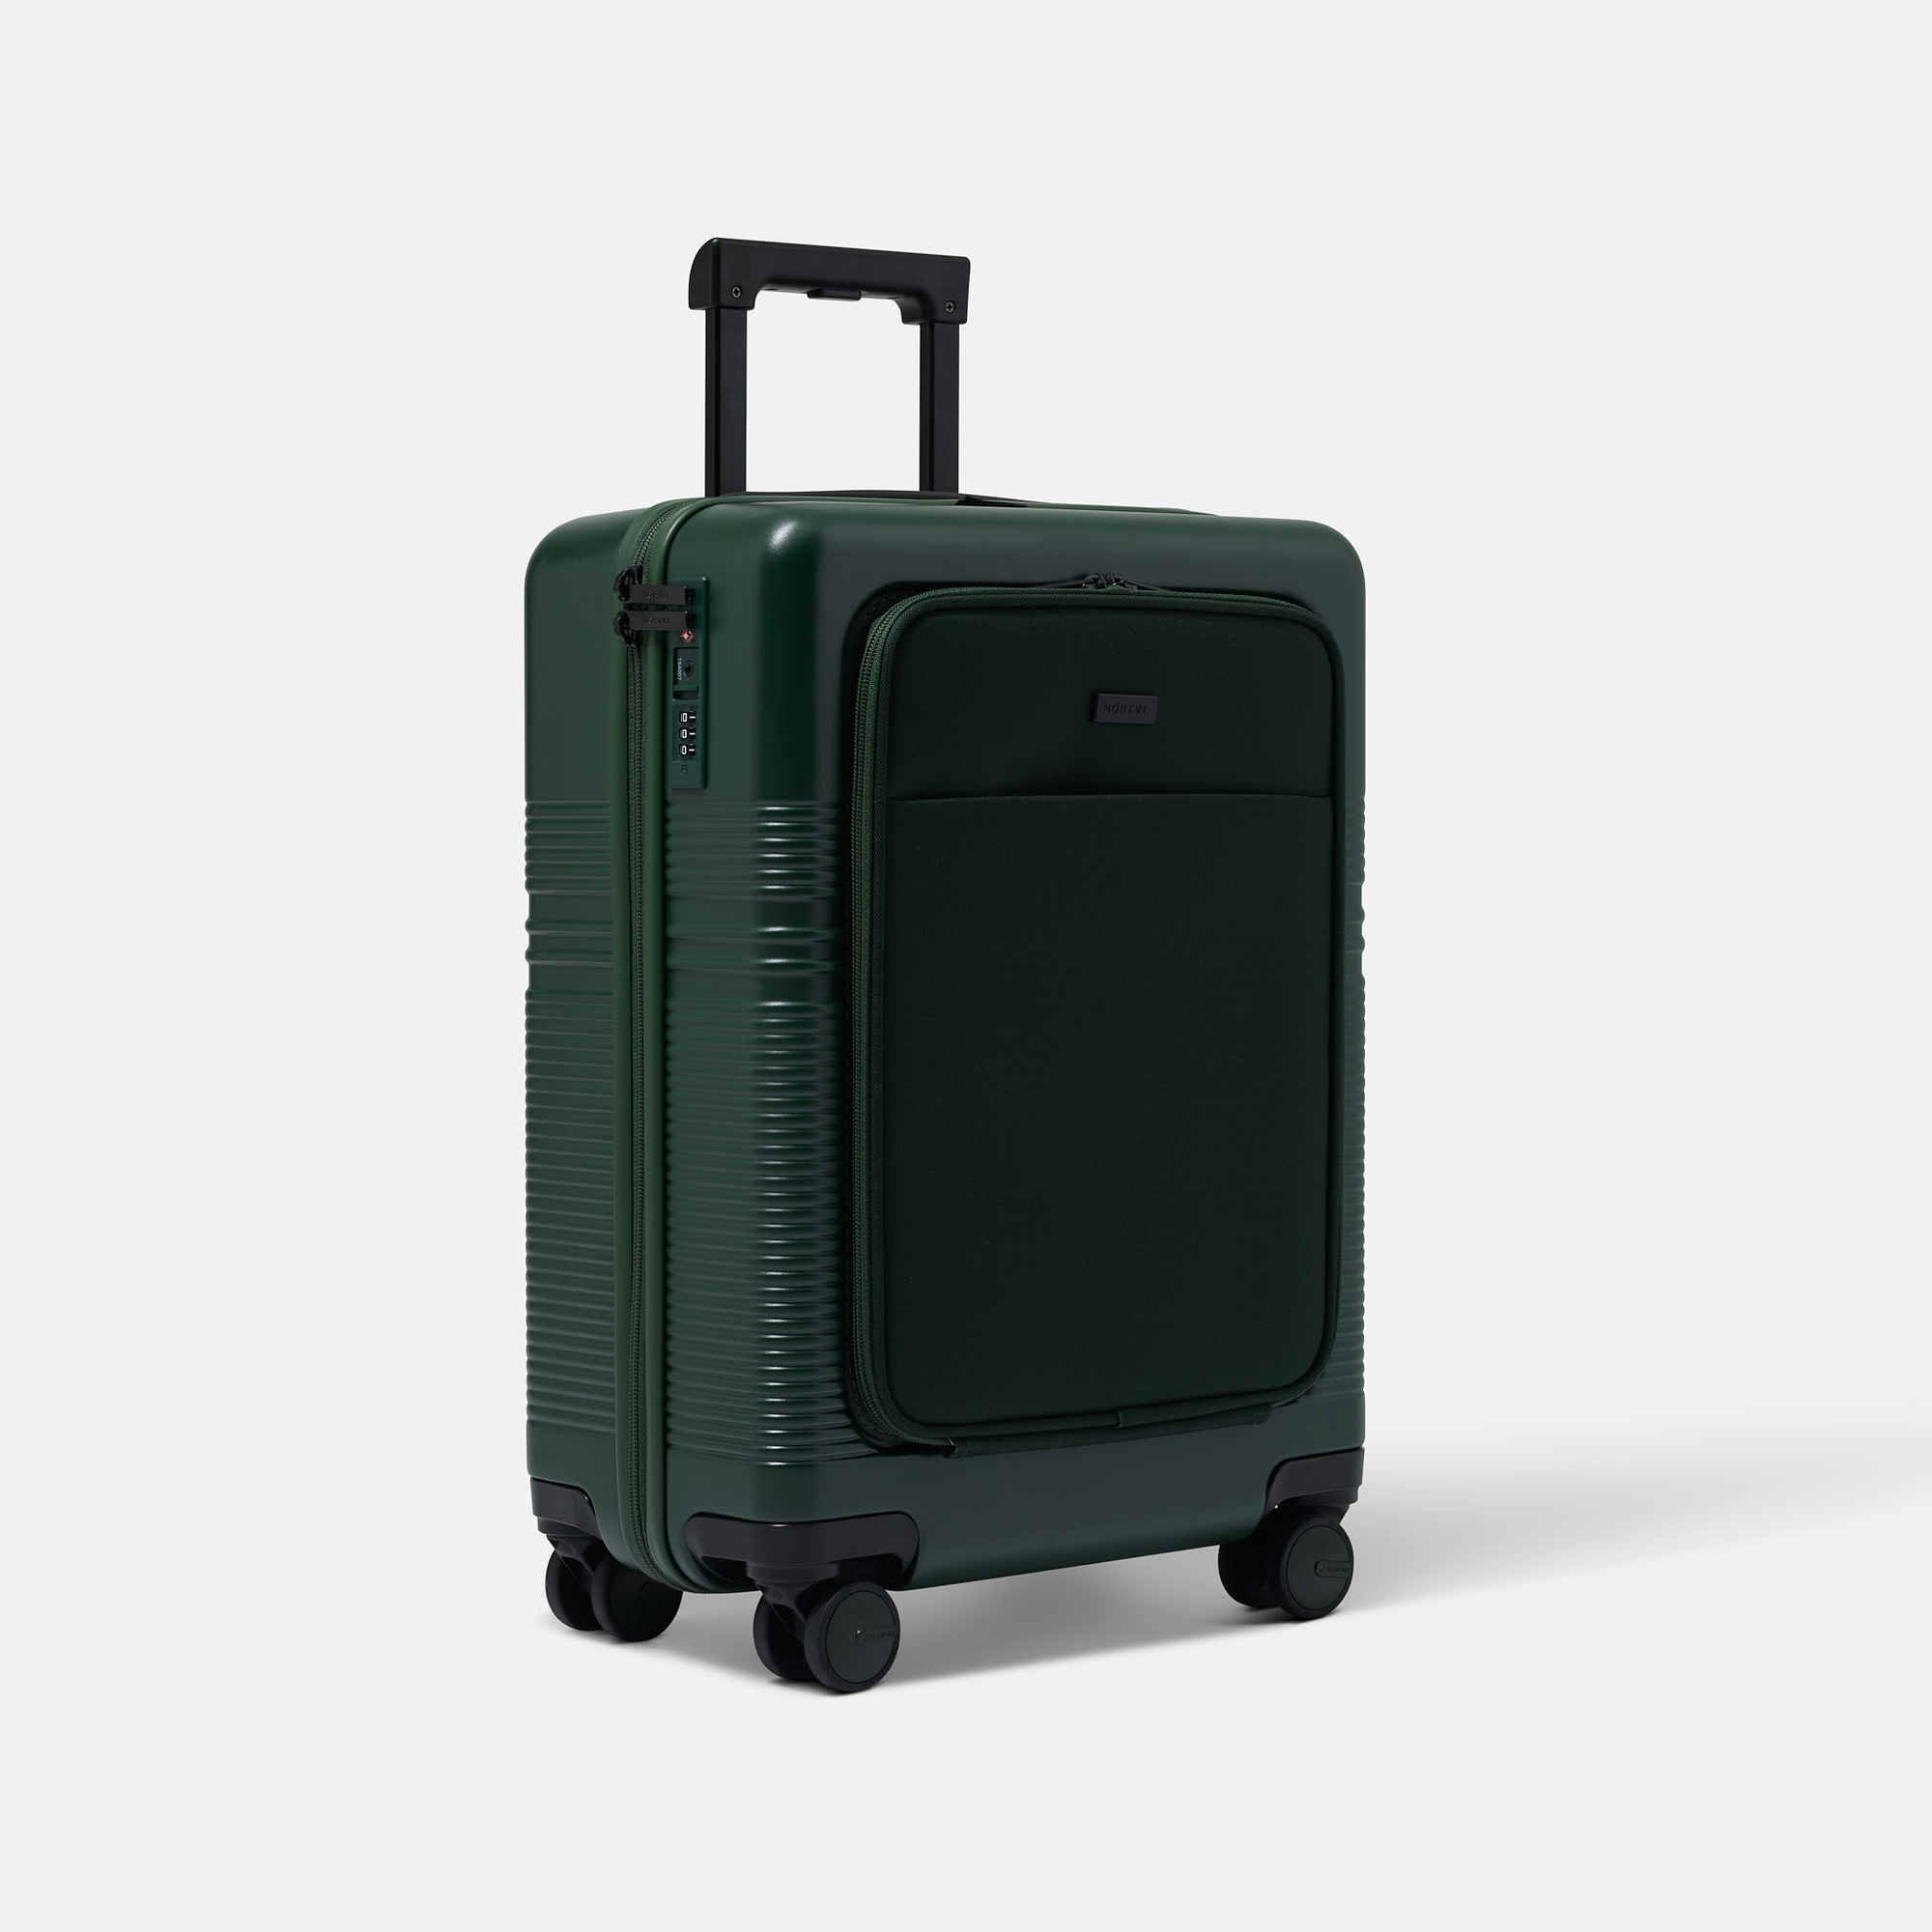 NORTVI sustainable design green suitcase with laptop compartment made of durable material. Perfect travel trolley to use as hand luggage.